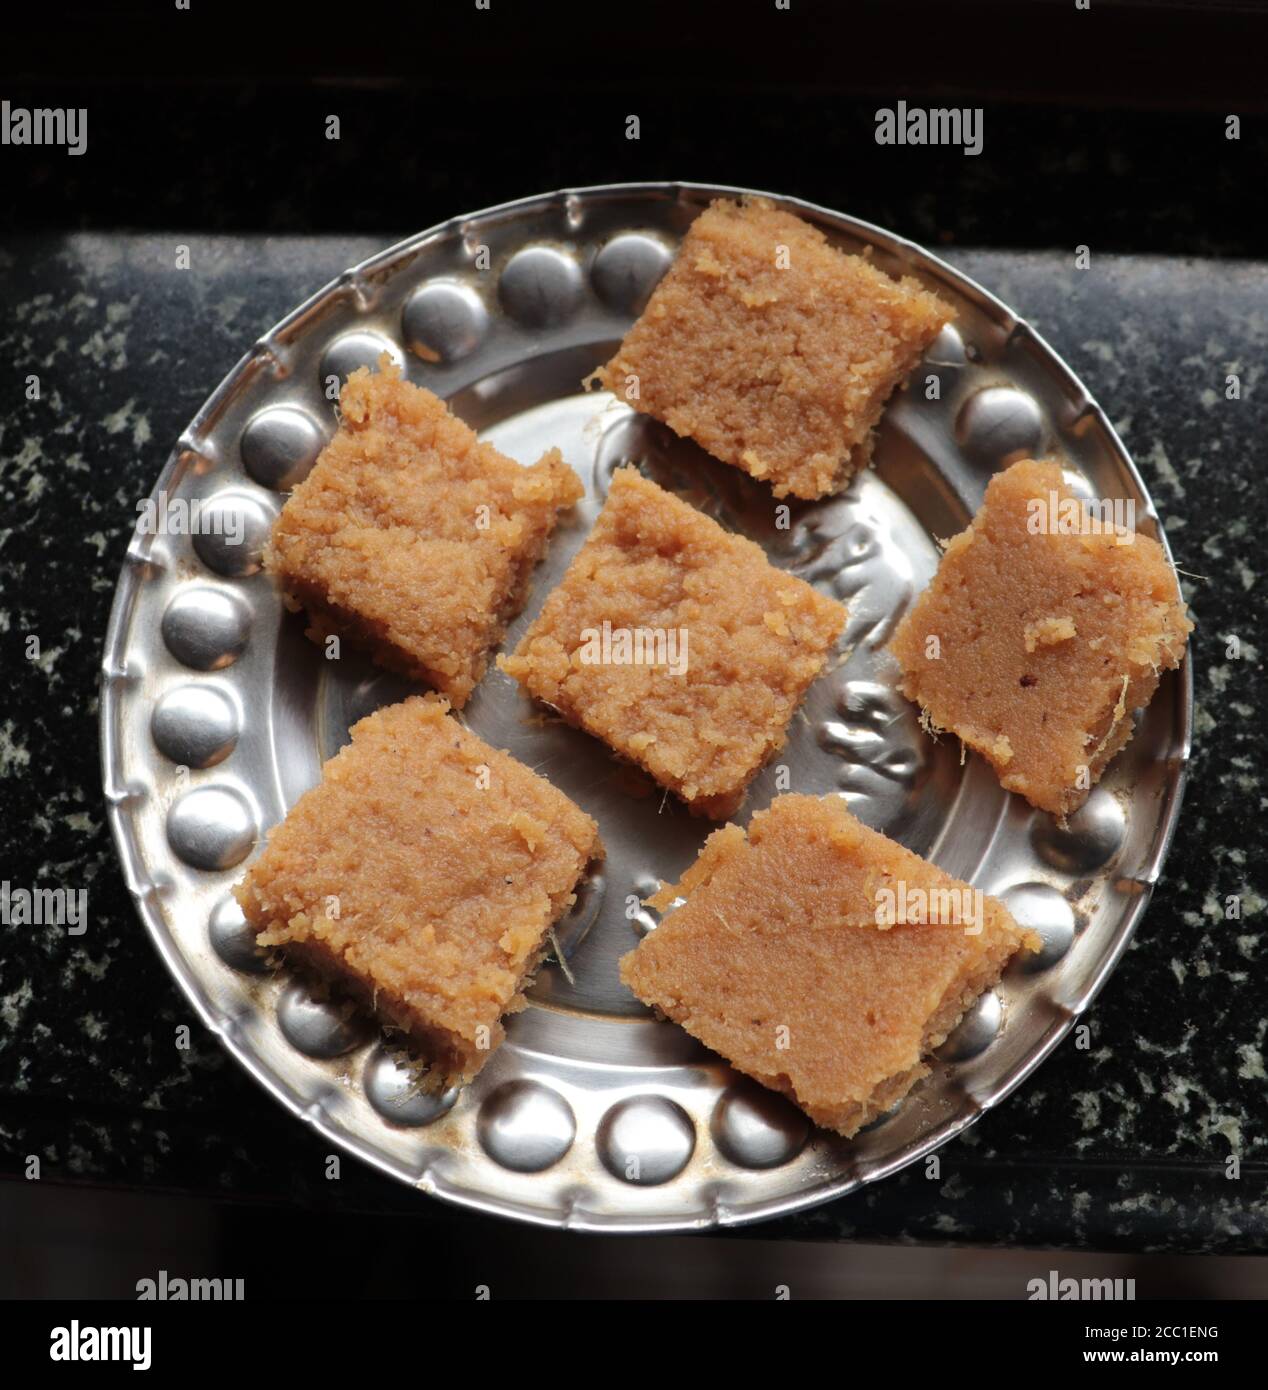 Ginger toffee popular Indian sweet Stock Photo